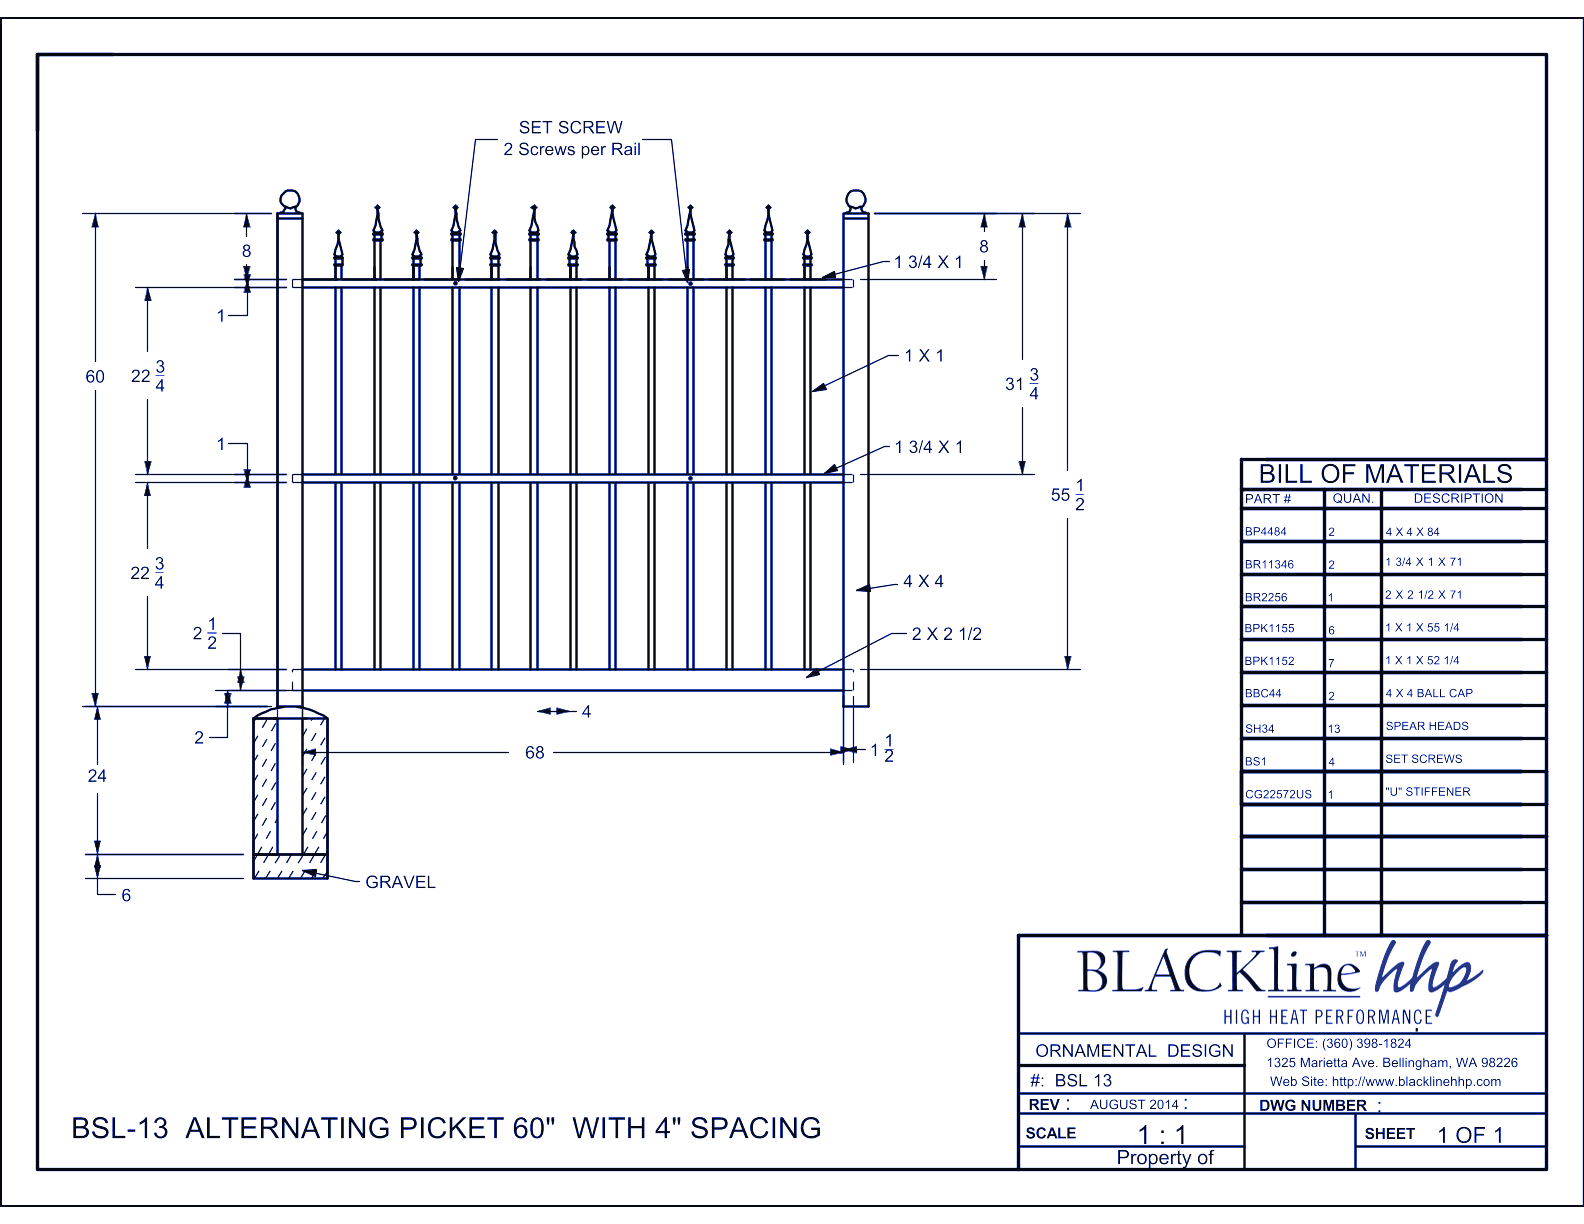 BSL-13: Alternating Picket 60" with 4" Spacing